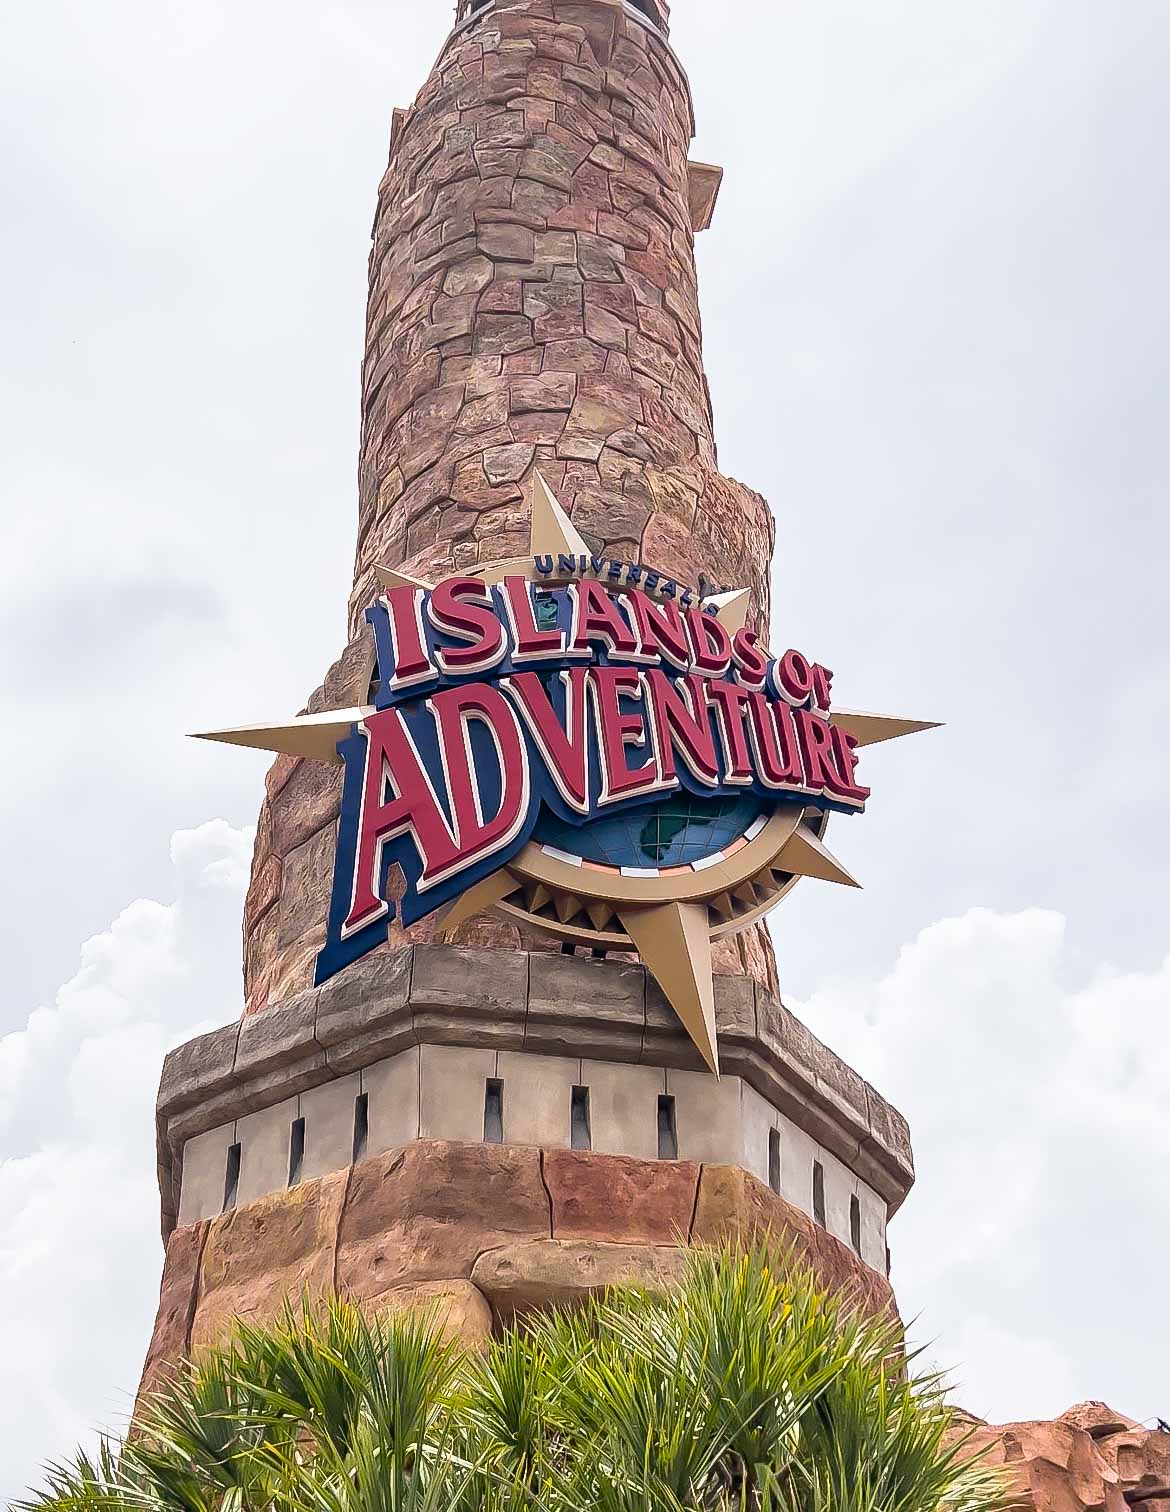 Discount Islands Of Adventure Tickets Are The Best And Only Way To Experience The Park